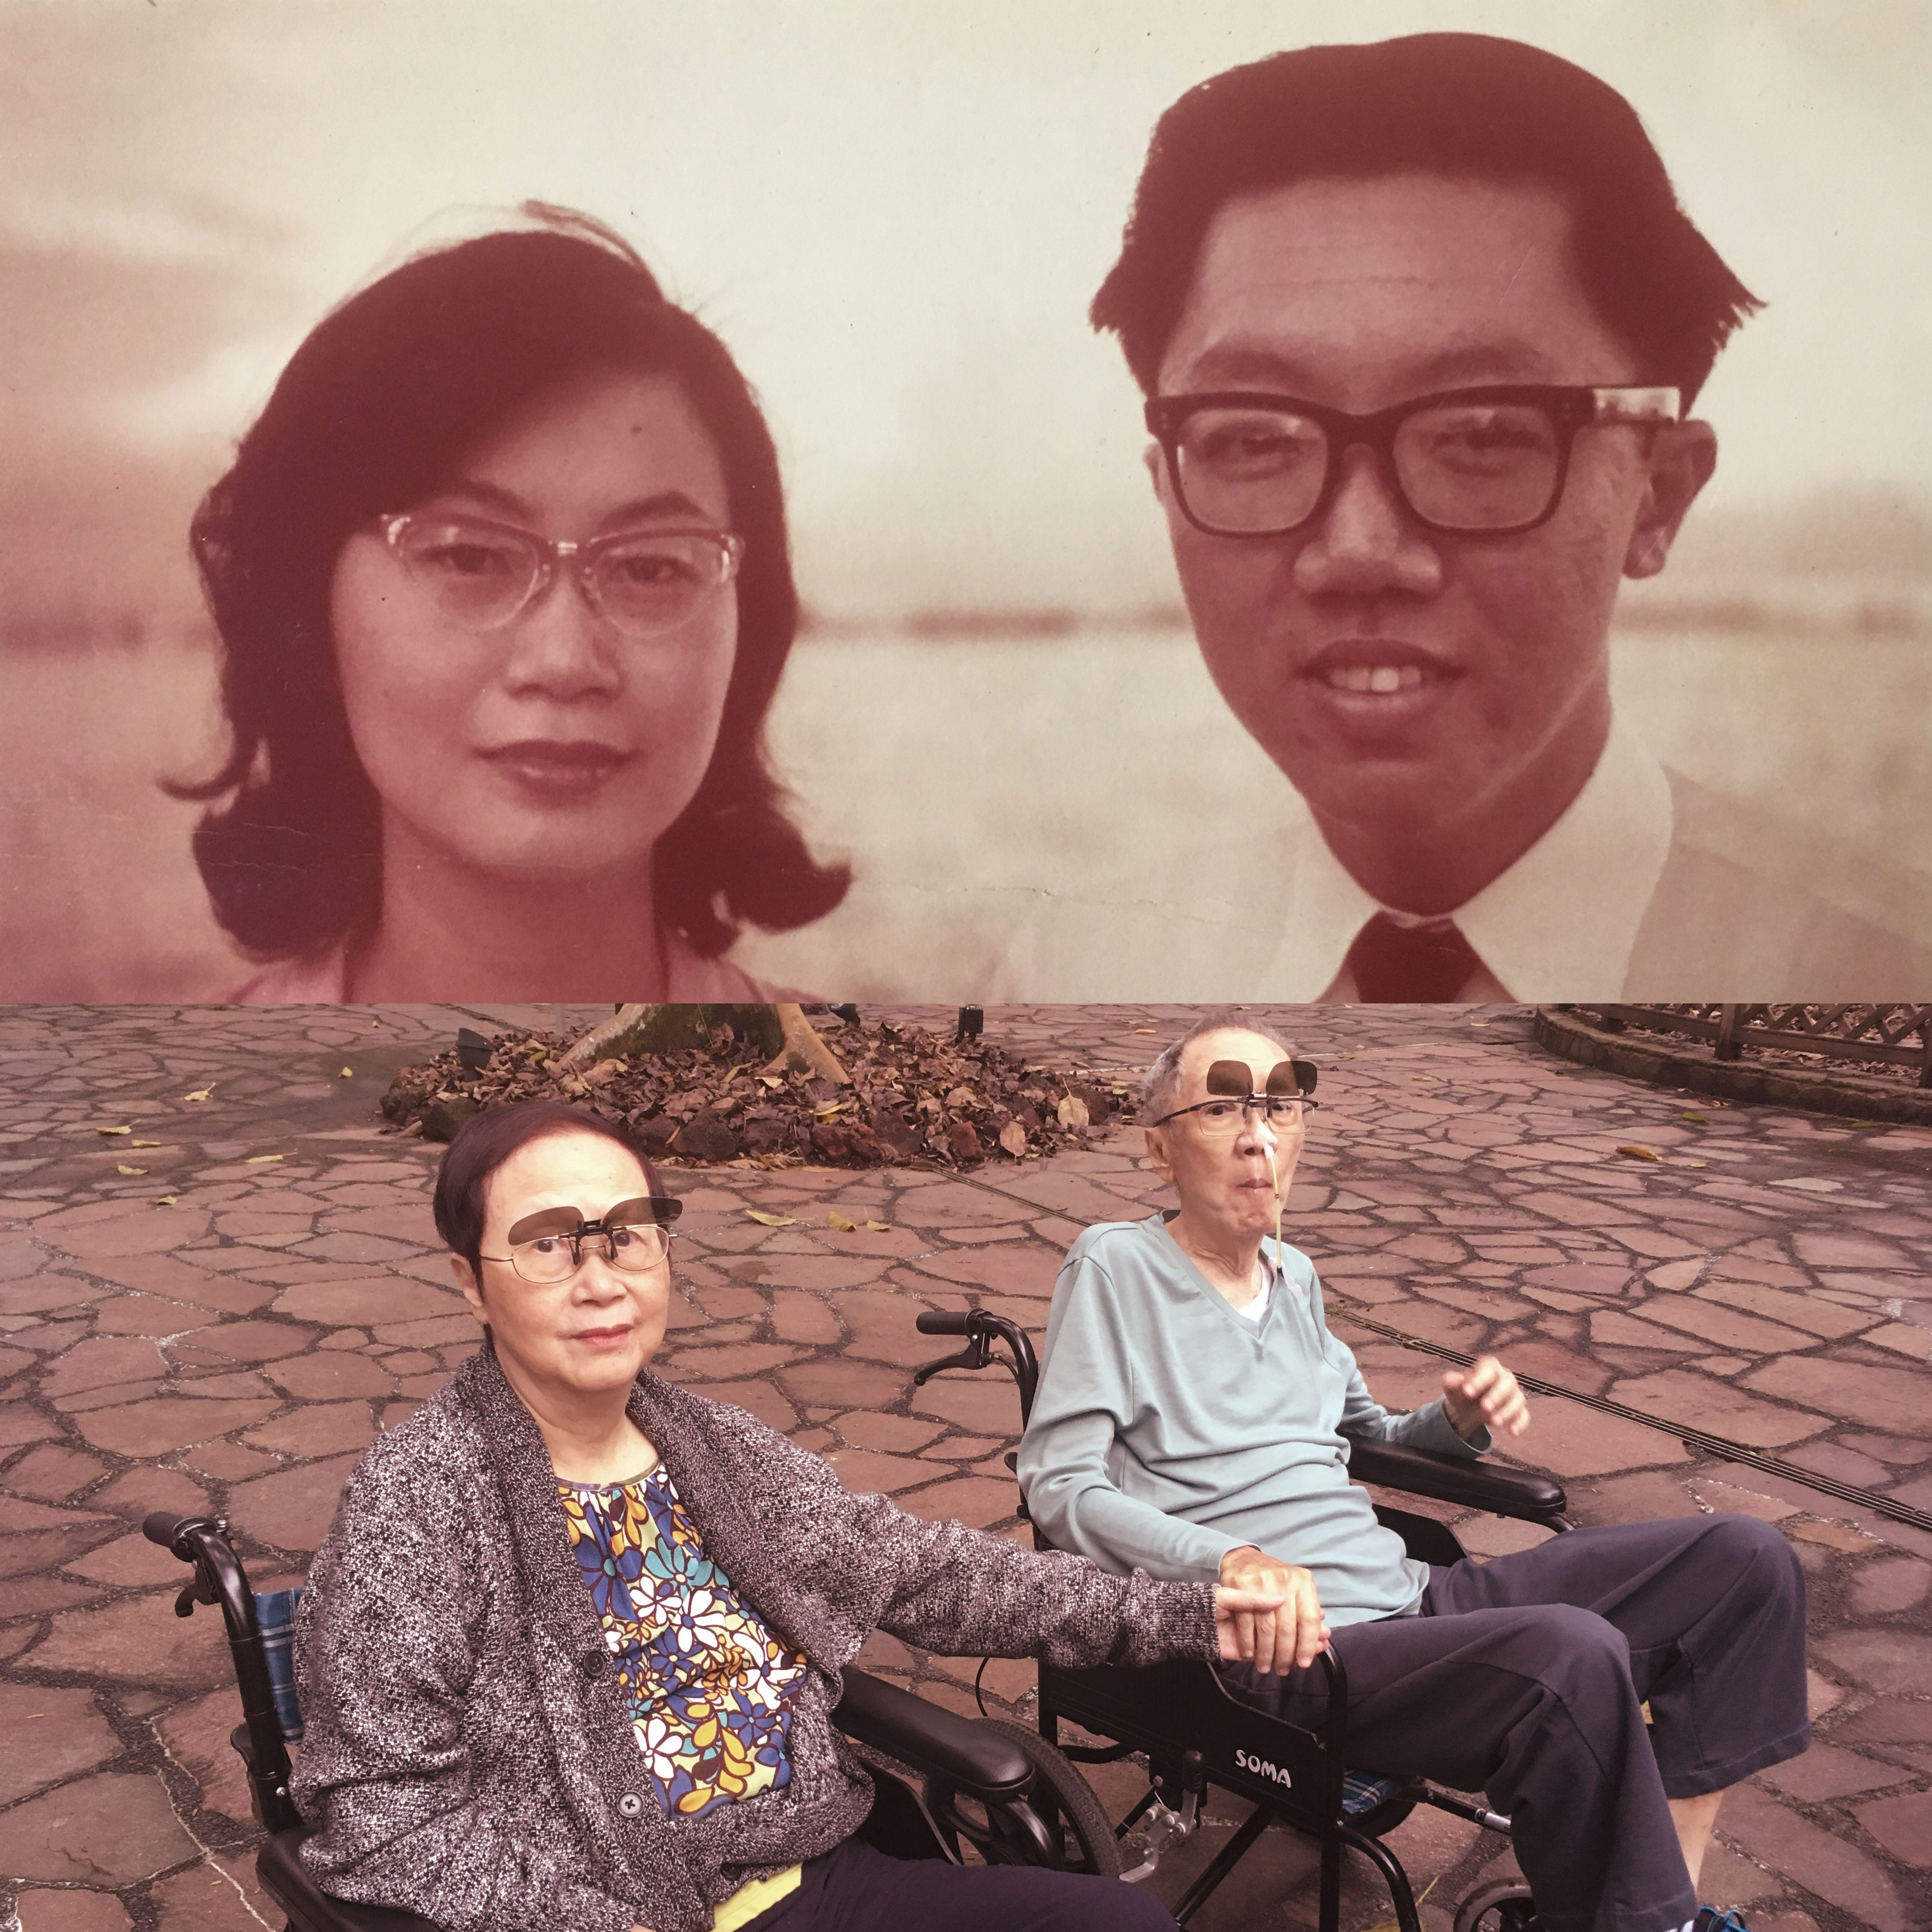 Mum and Dad: Then and Now (2018)